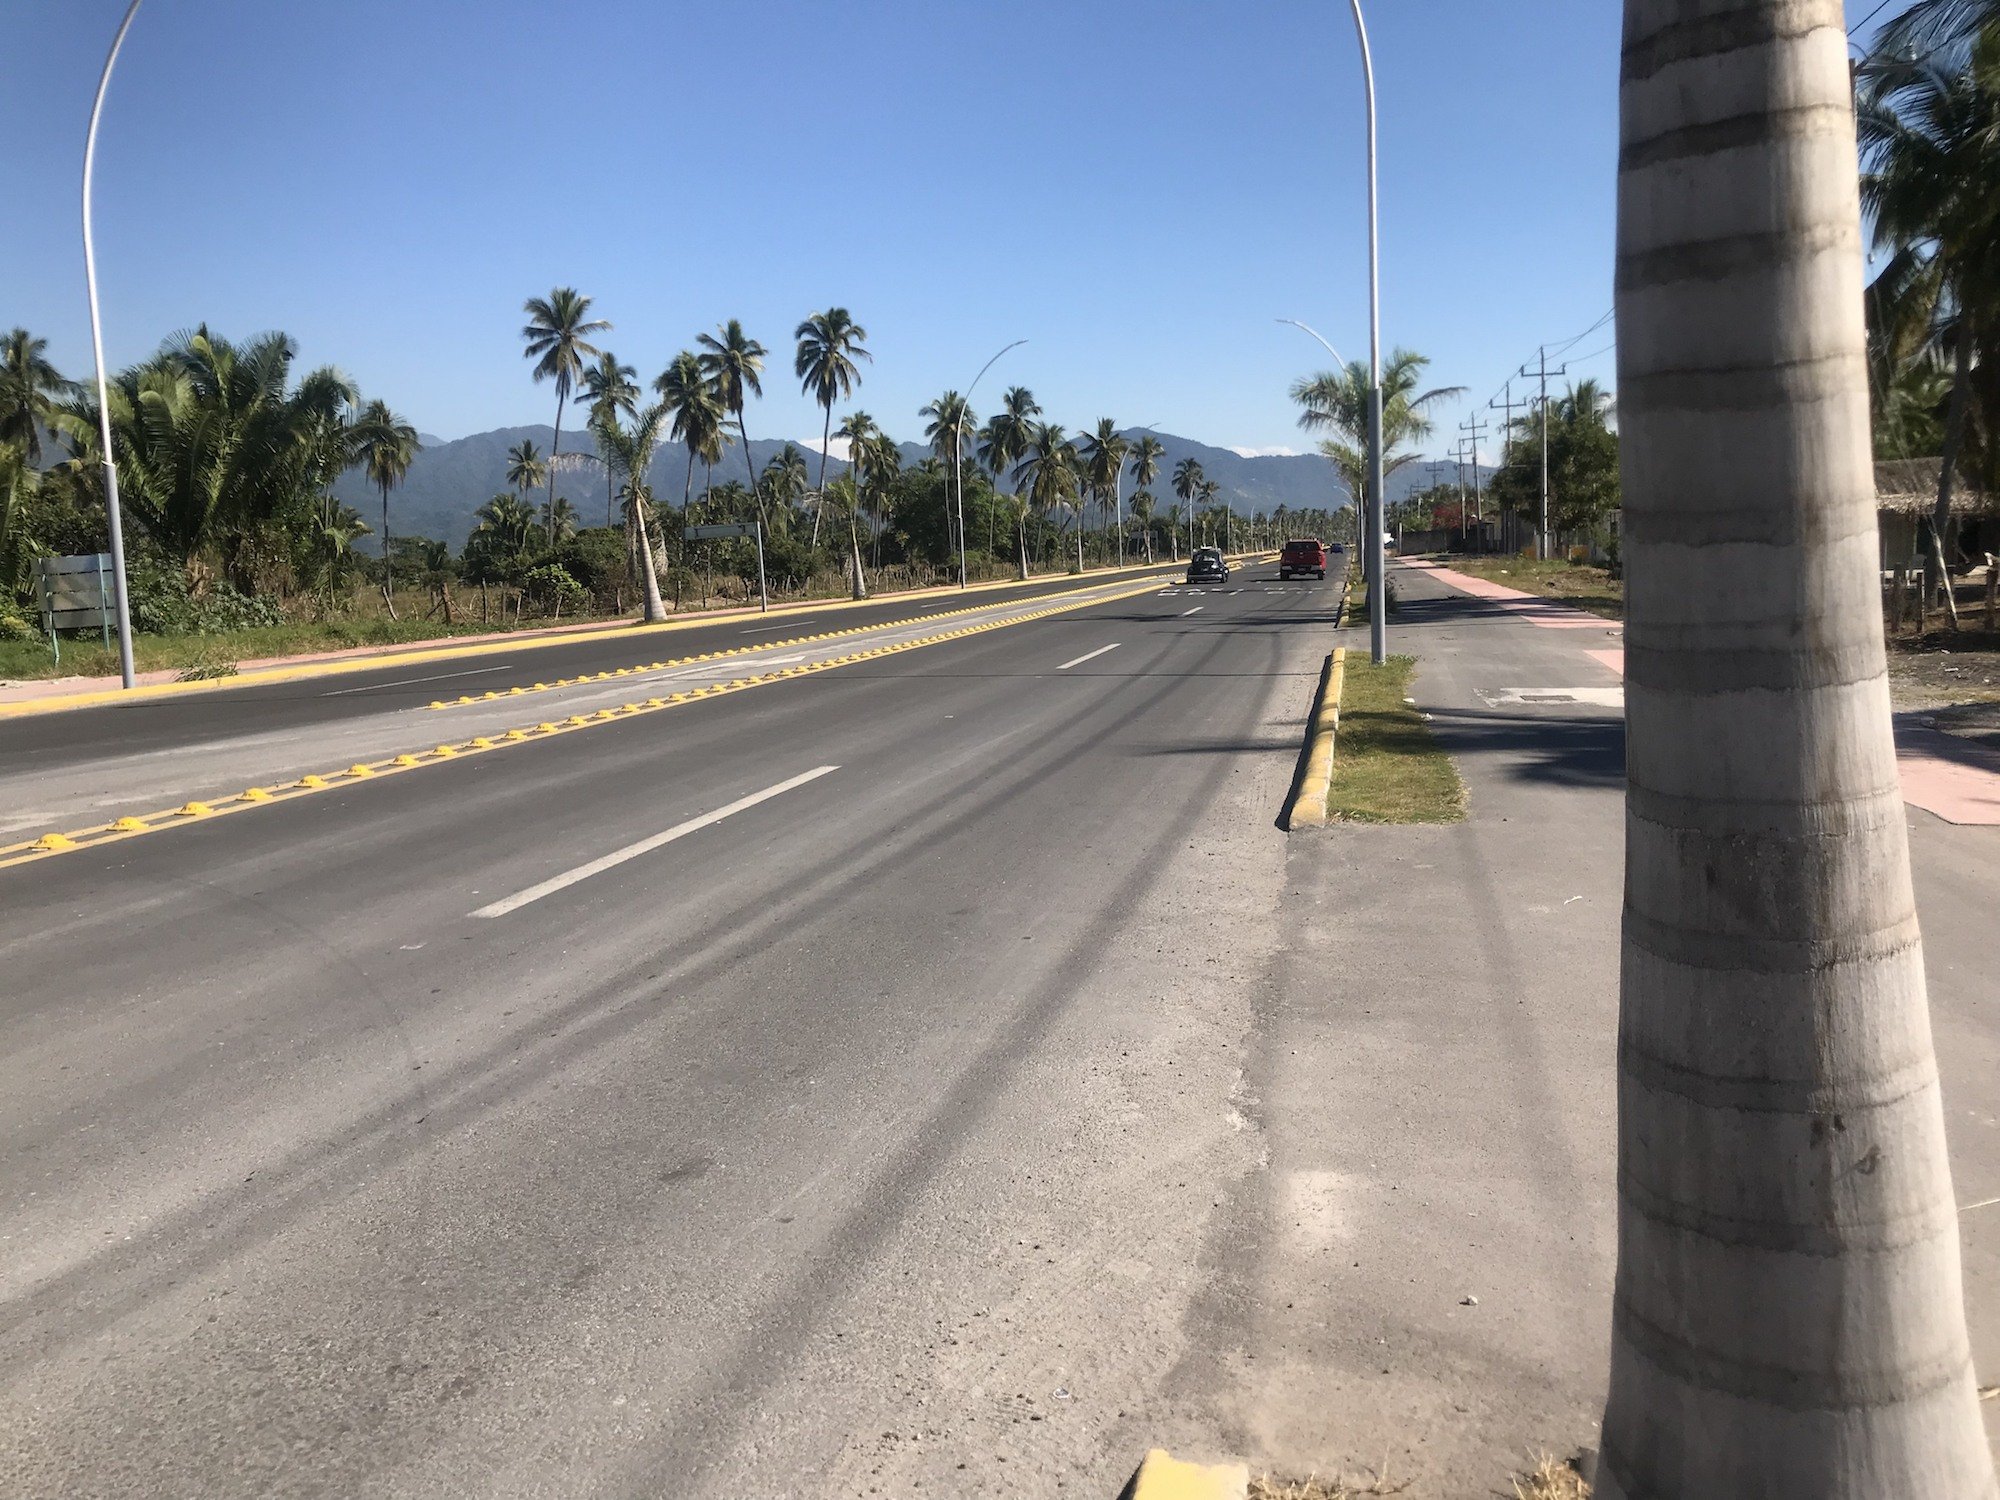 A roadway in Tepic, Mexico